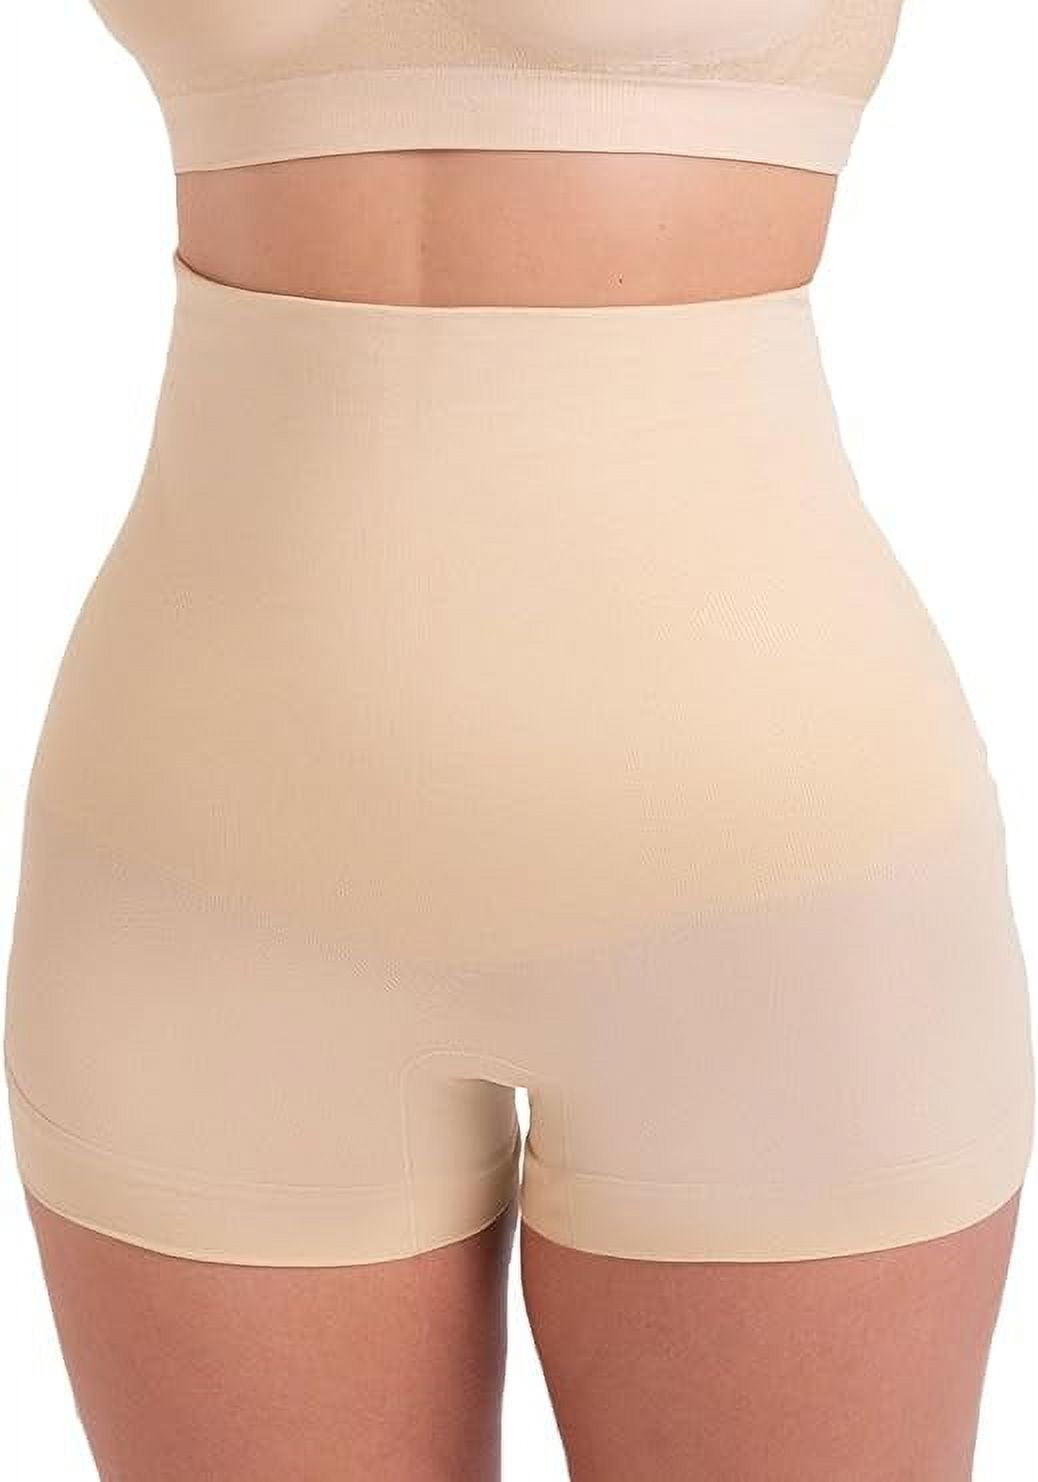 Assets SPANX Ultimate Ultra Shaping Sheers, Coffee, 5 